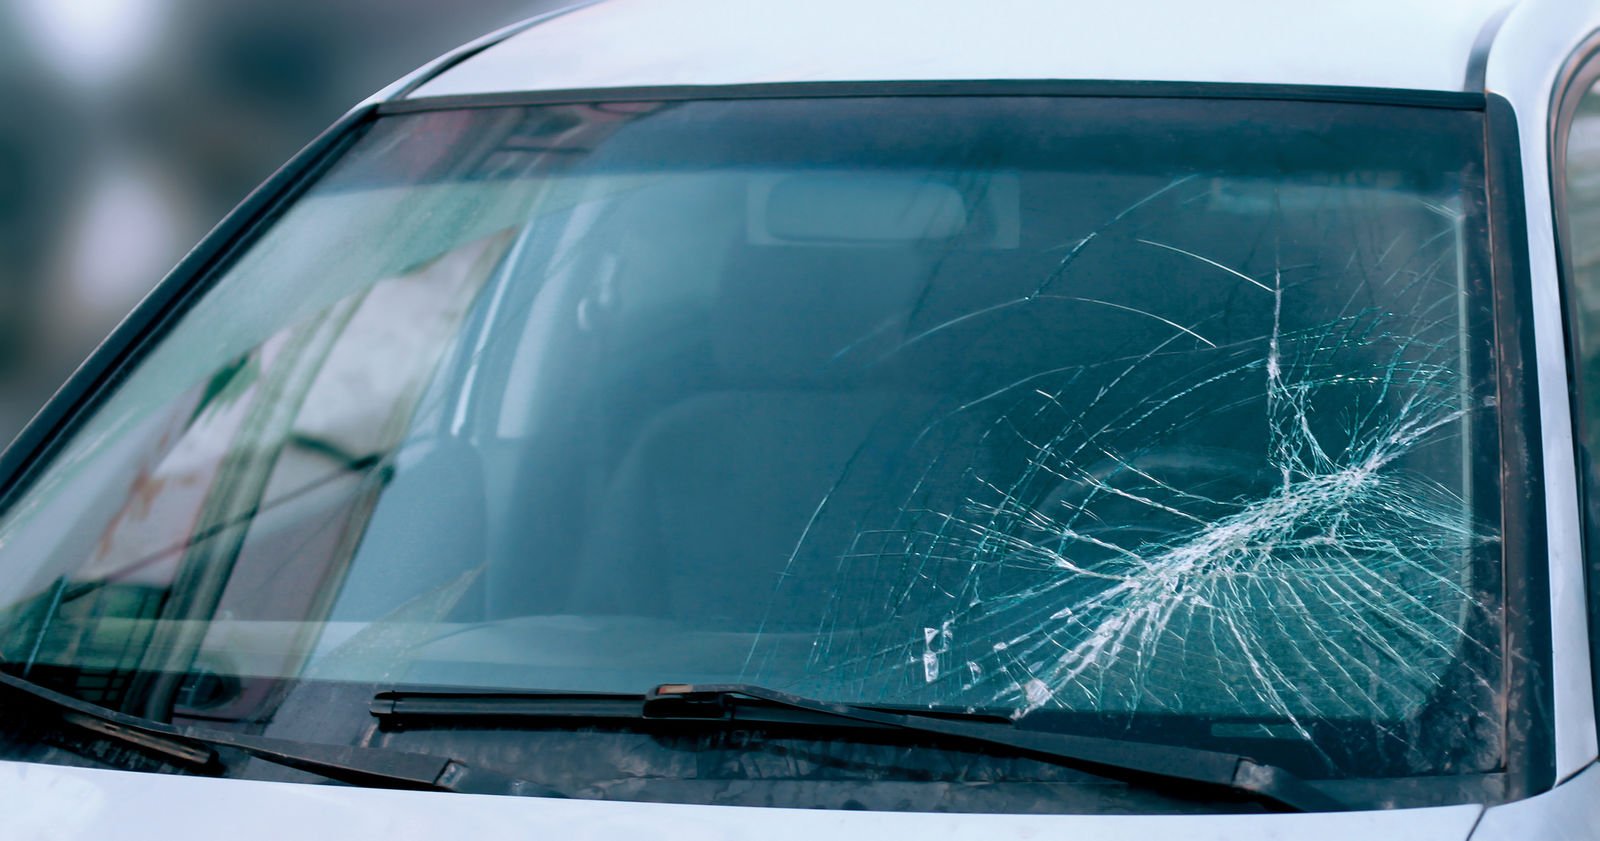 Idaho Windshield Replacement Insurance: What are the Full Glass coverage laws in Idaho?